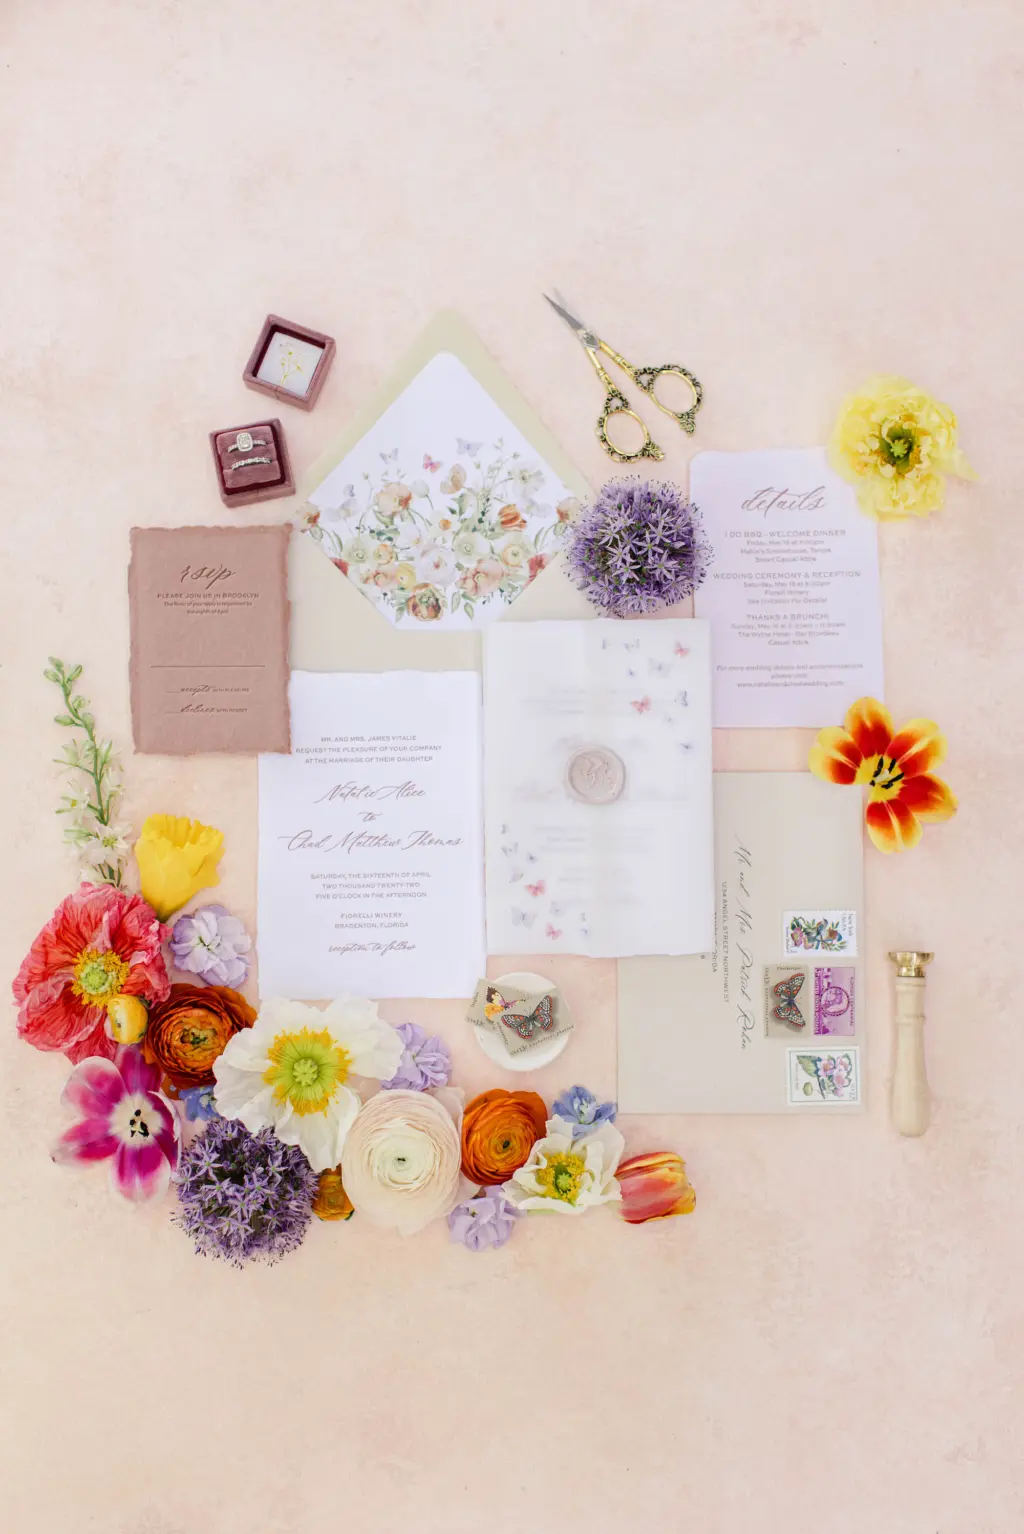 Whimsical Spring Butterfly White Stationery Deckle Edge Wedding S Suite Flat Lay Ideas | Tampa Bay Printing Studio A&P Designs | Watercolor Floral Print Envelope Liner | Wedding Invitation with Vellum Wrap and Wax Seal